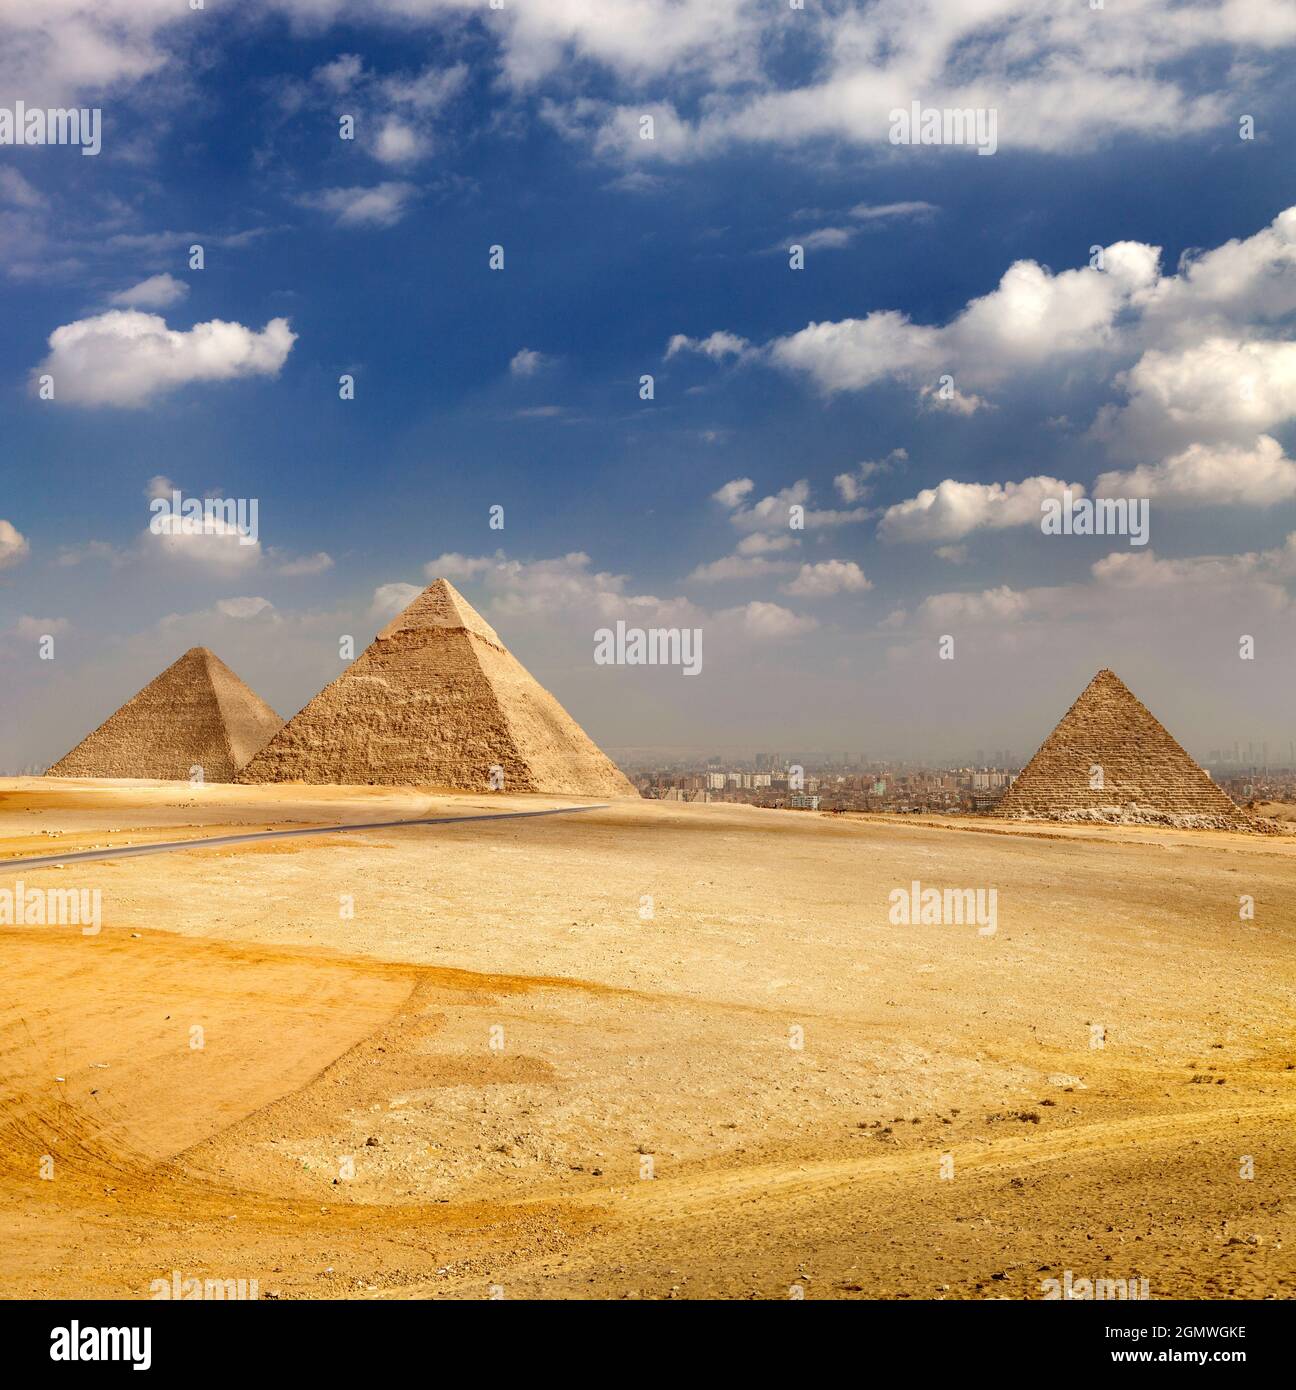 Gixa, Cairo, Egypt, 7 December 2010    The great Pyramids of Giza, Egypt are an iconic, ancient place of wonder and mystery. And some of the most trul Stock Photo